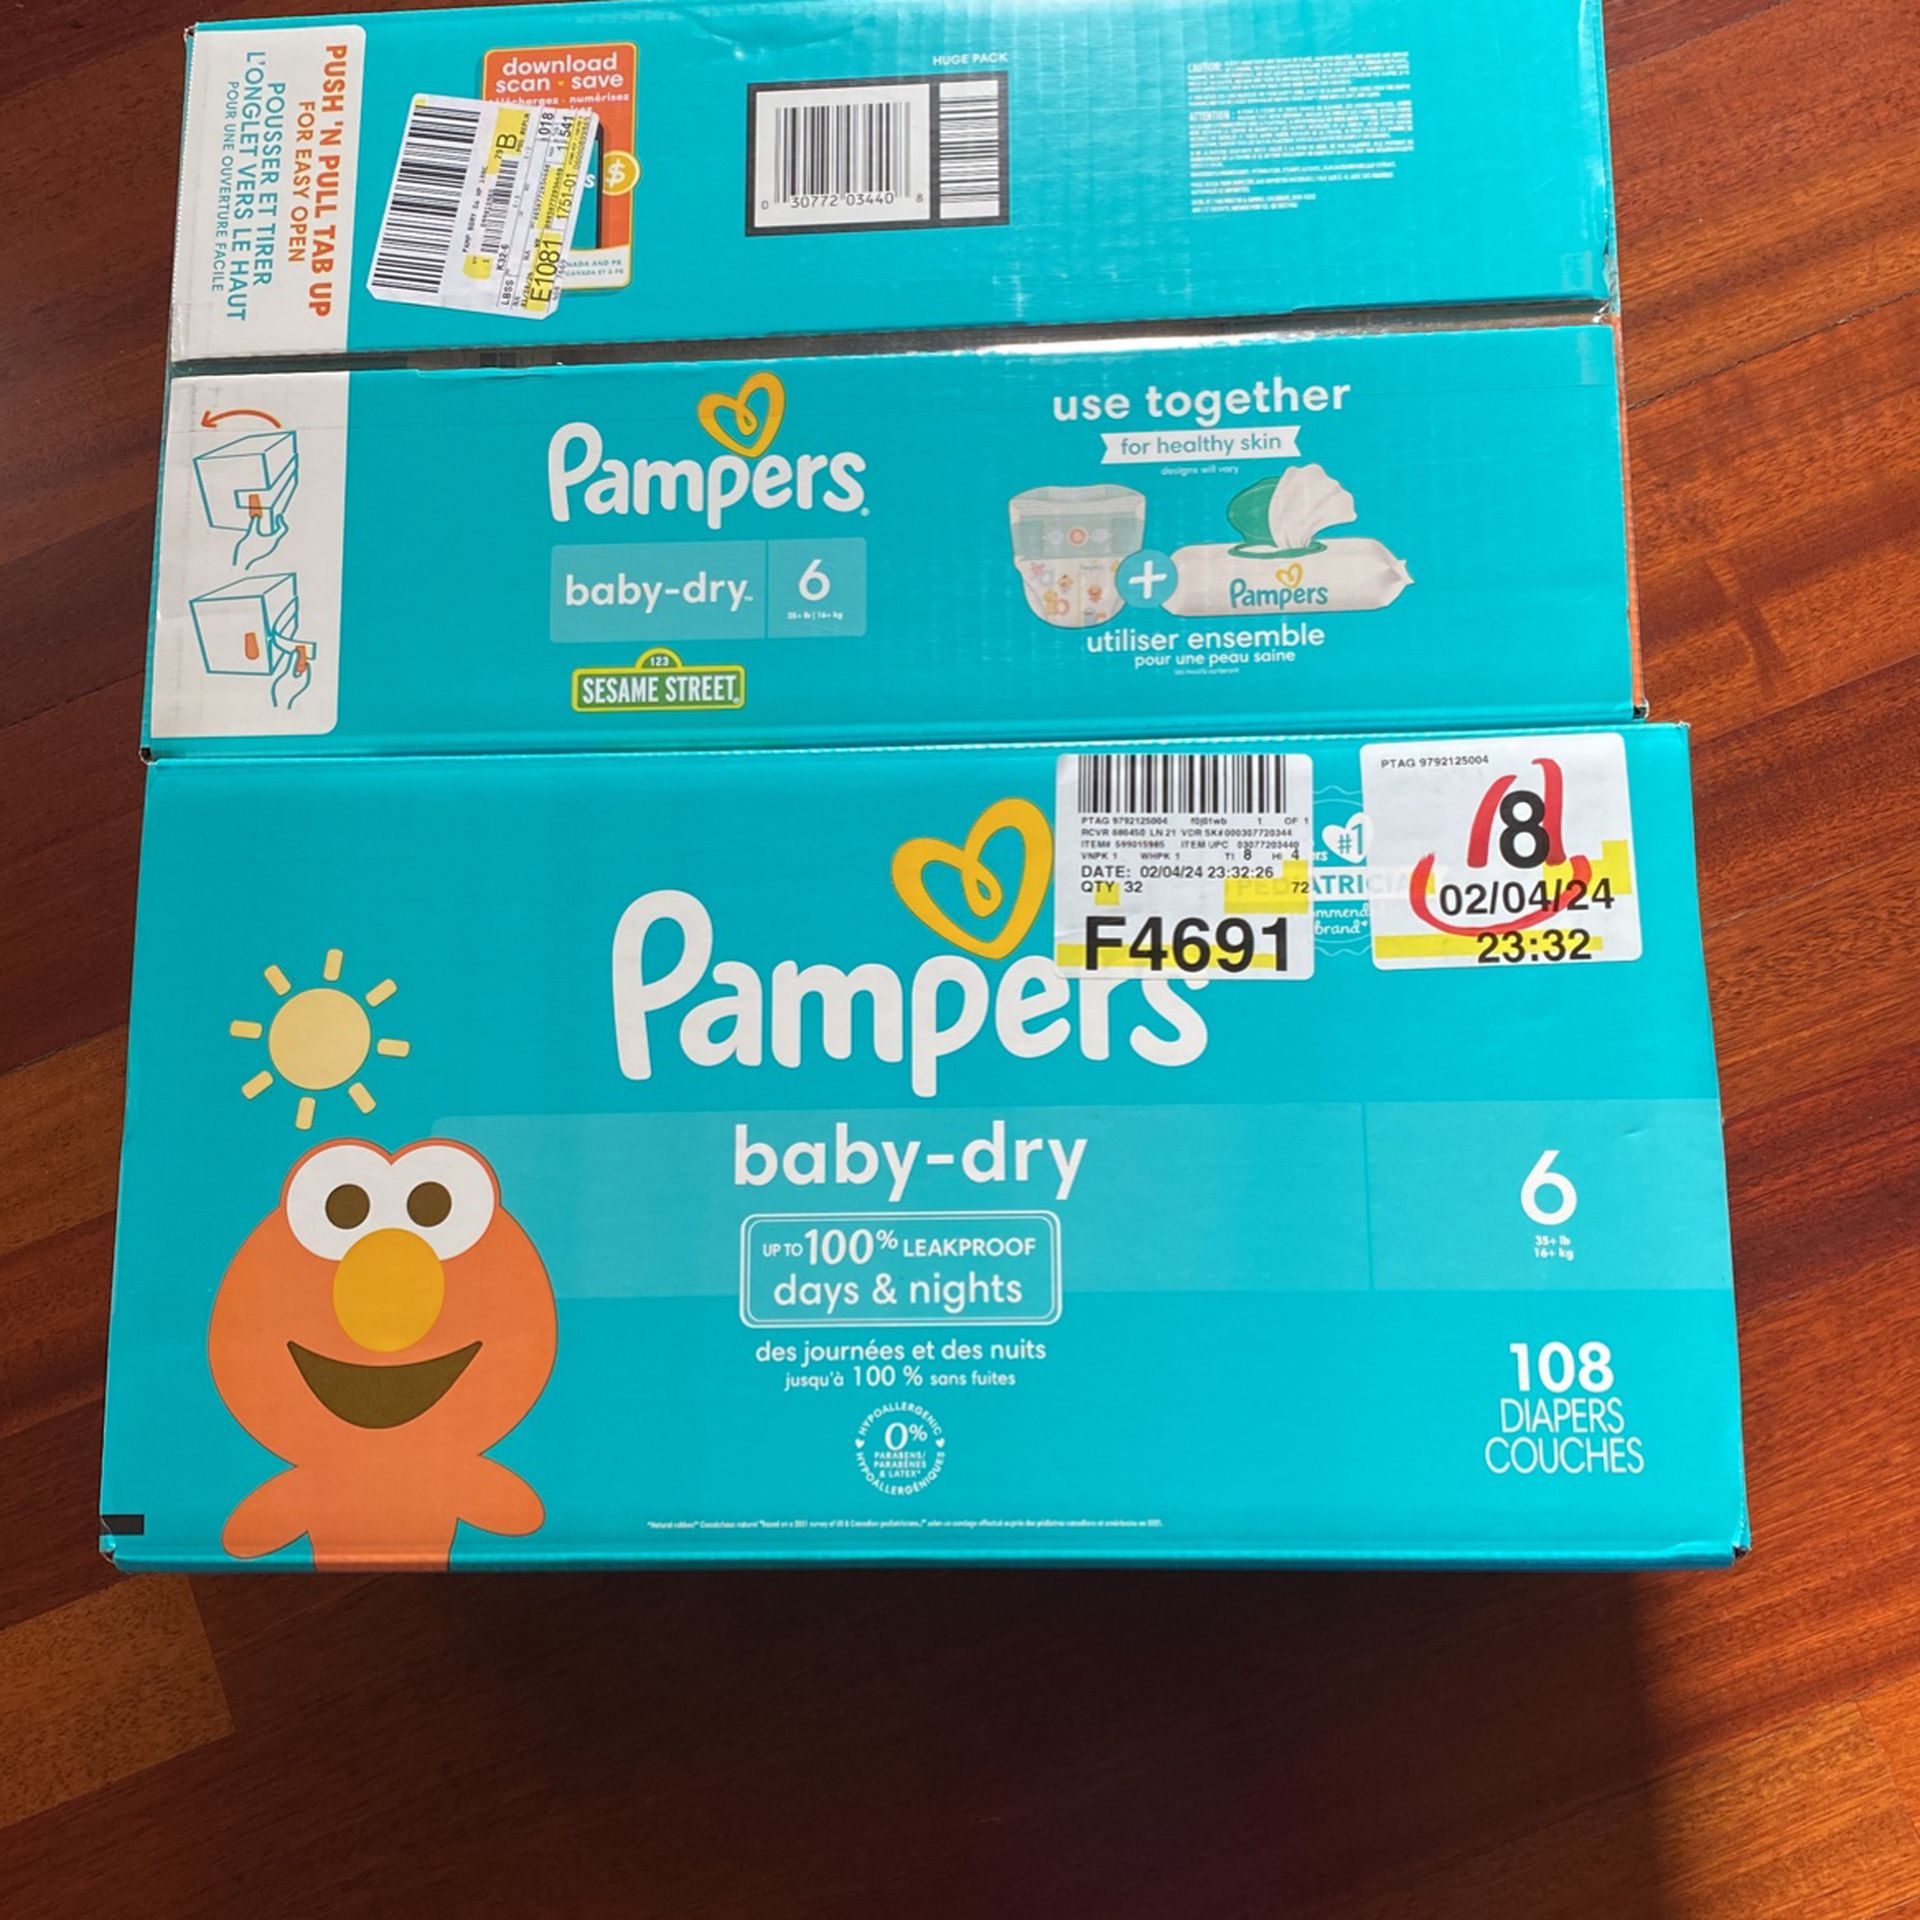 2 Brand New Pampers Diapers 108 Count Each